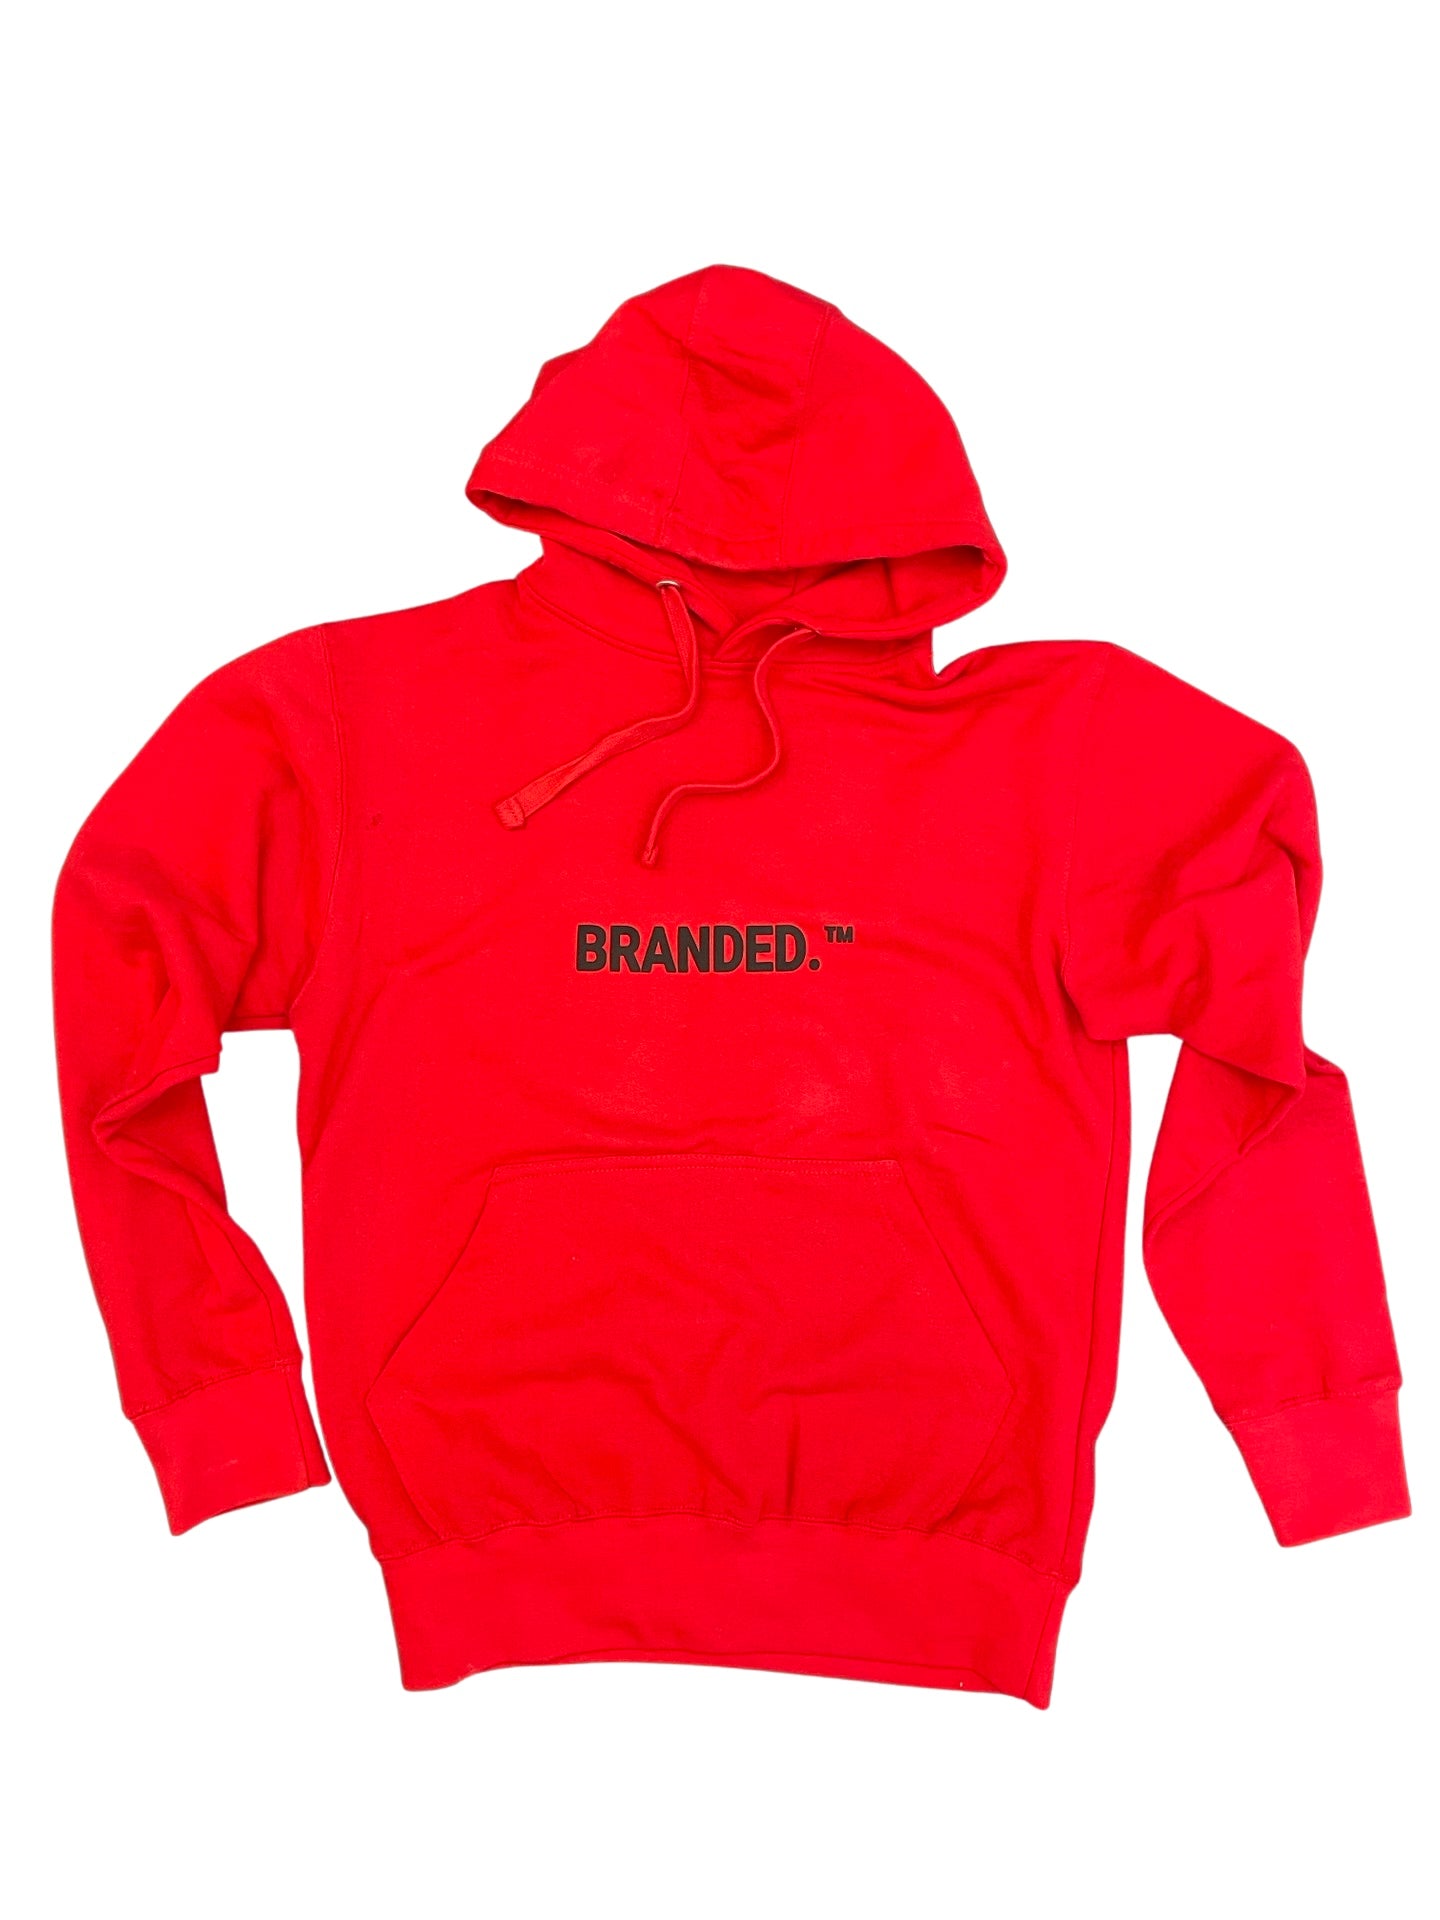 Branded. ™ Set RED (End of Life)